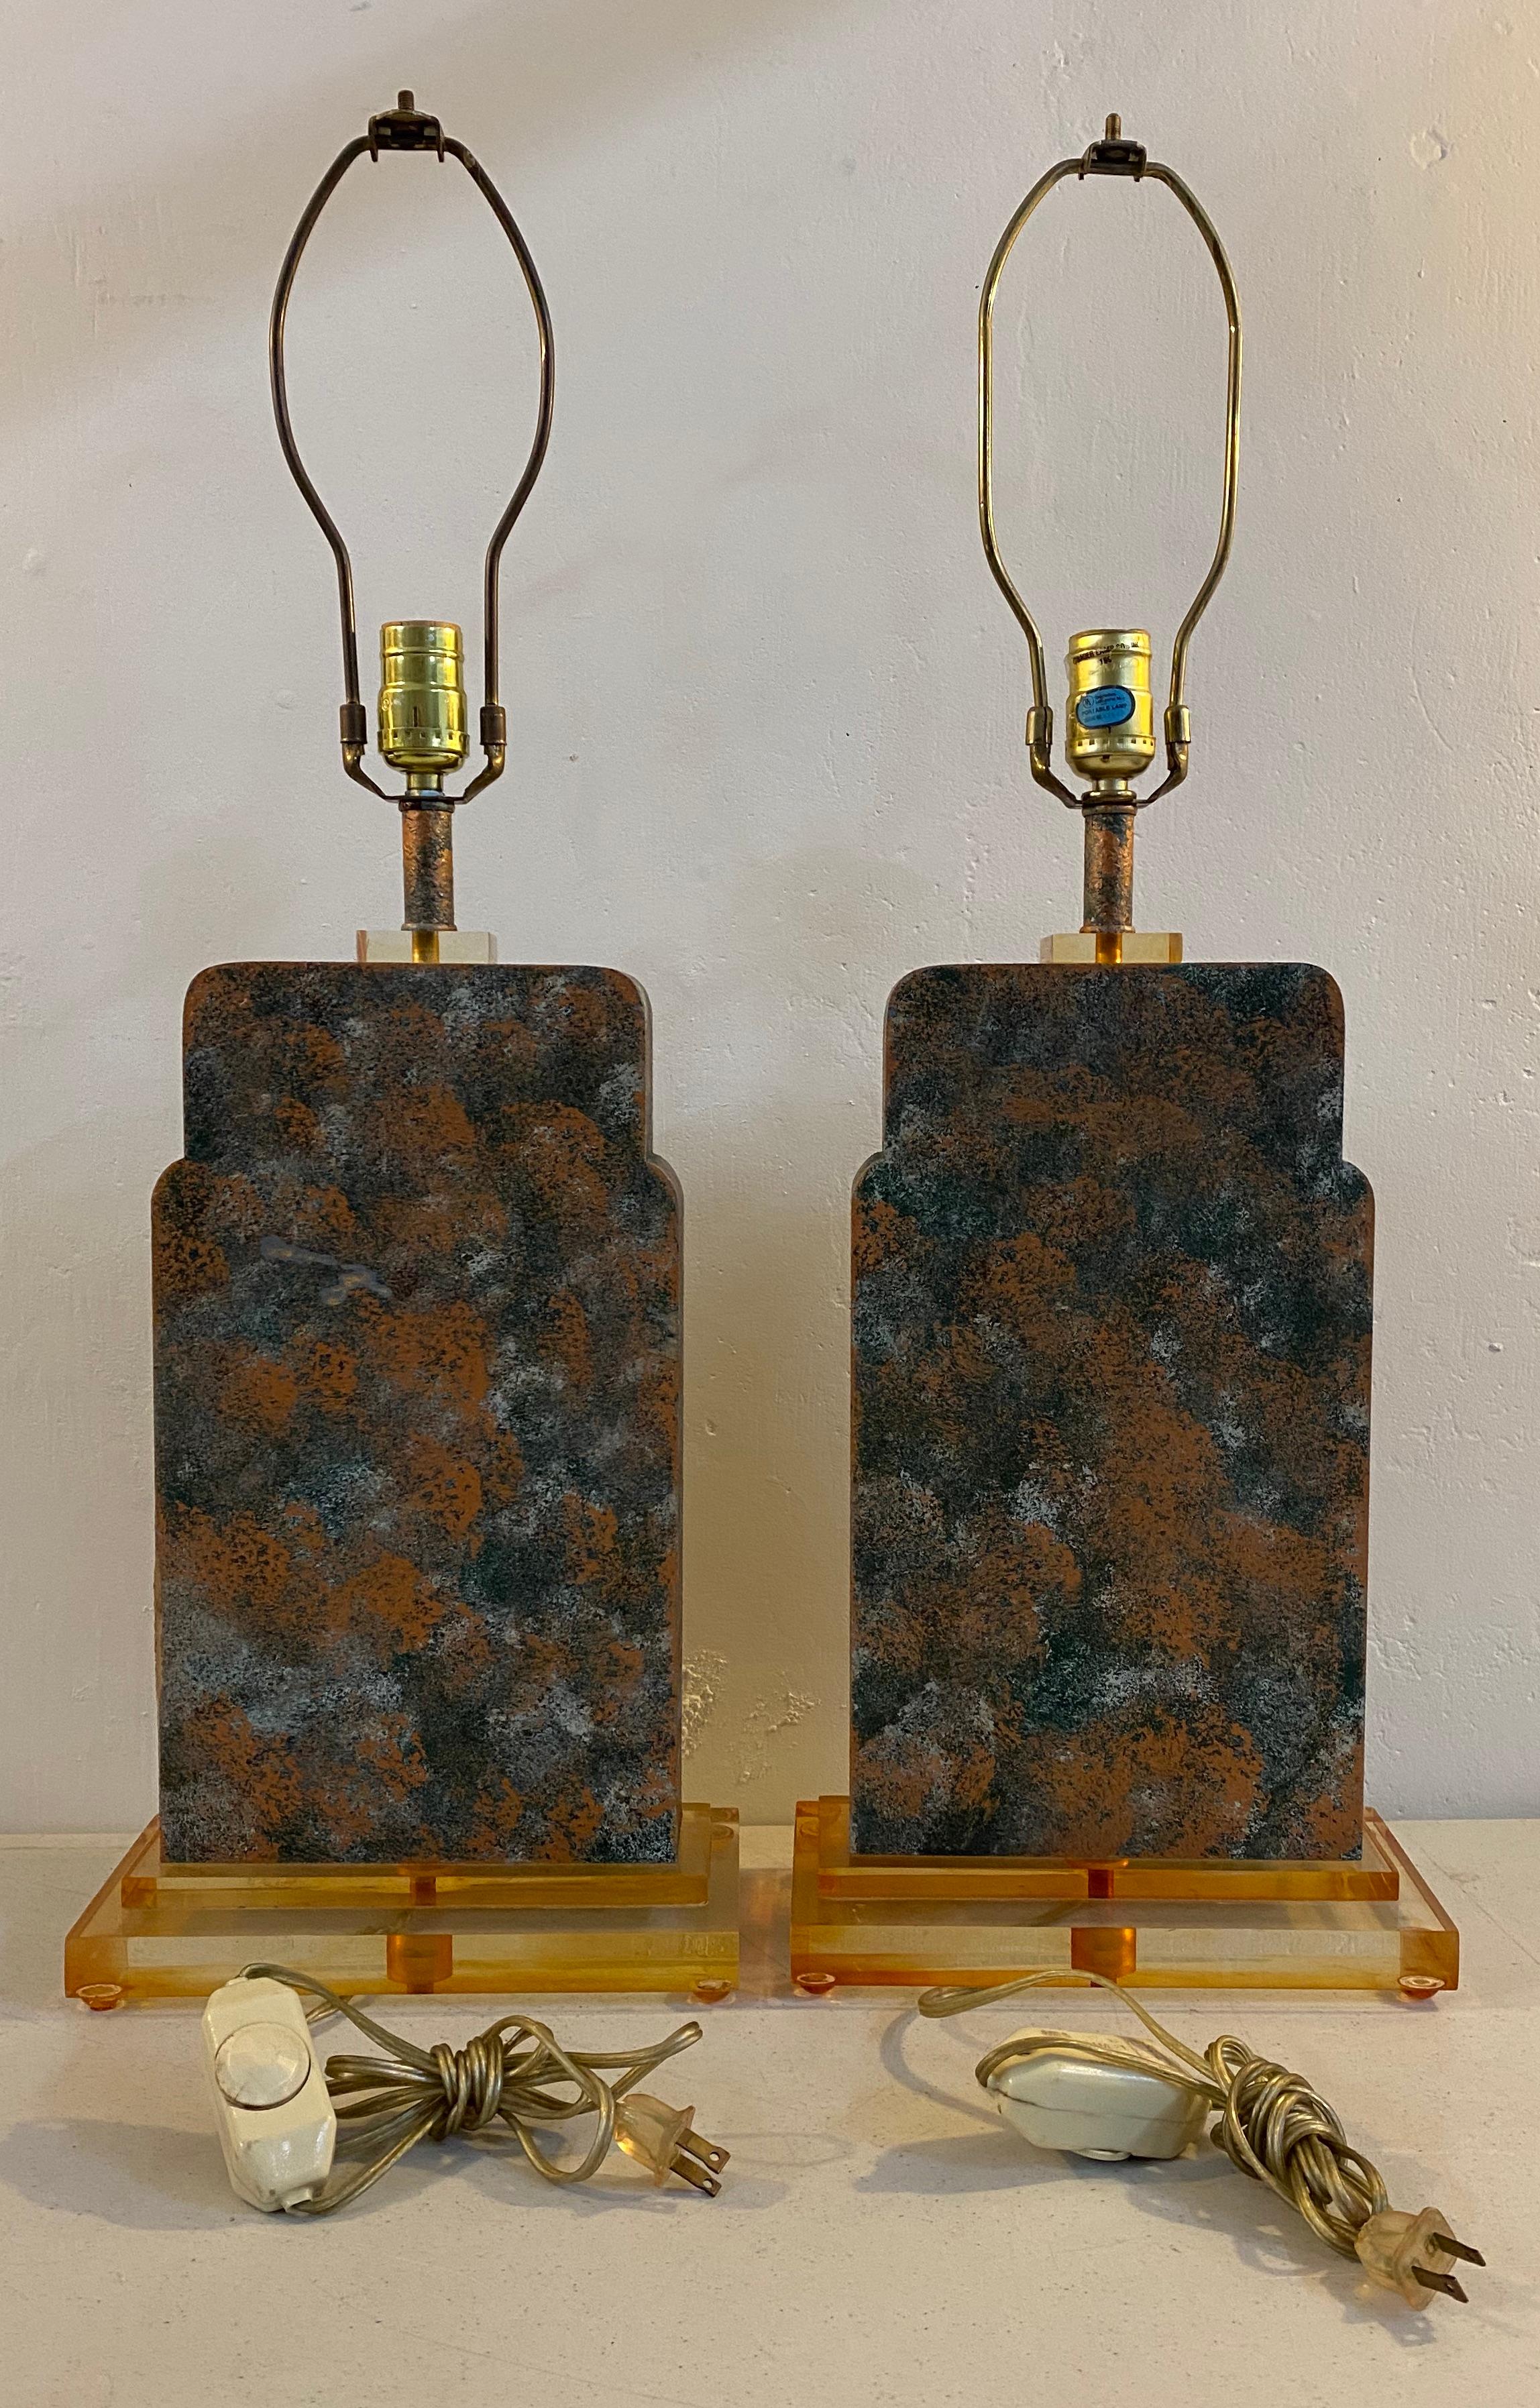 Matching Pair of Midcentury Asian Inspired Table Lamps, circa 1950 For Sale 1